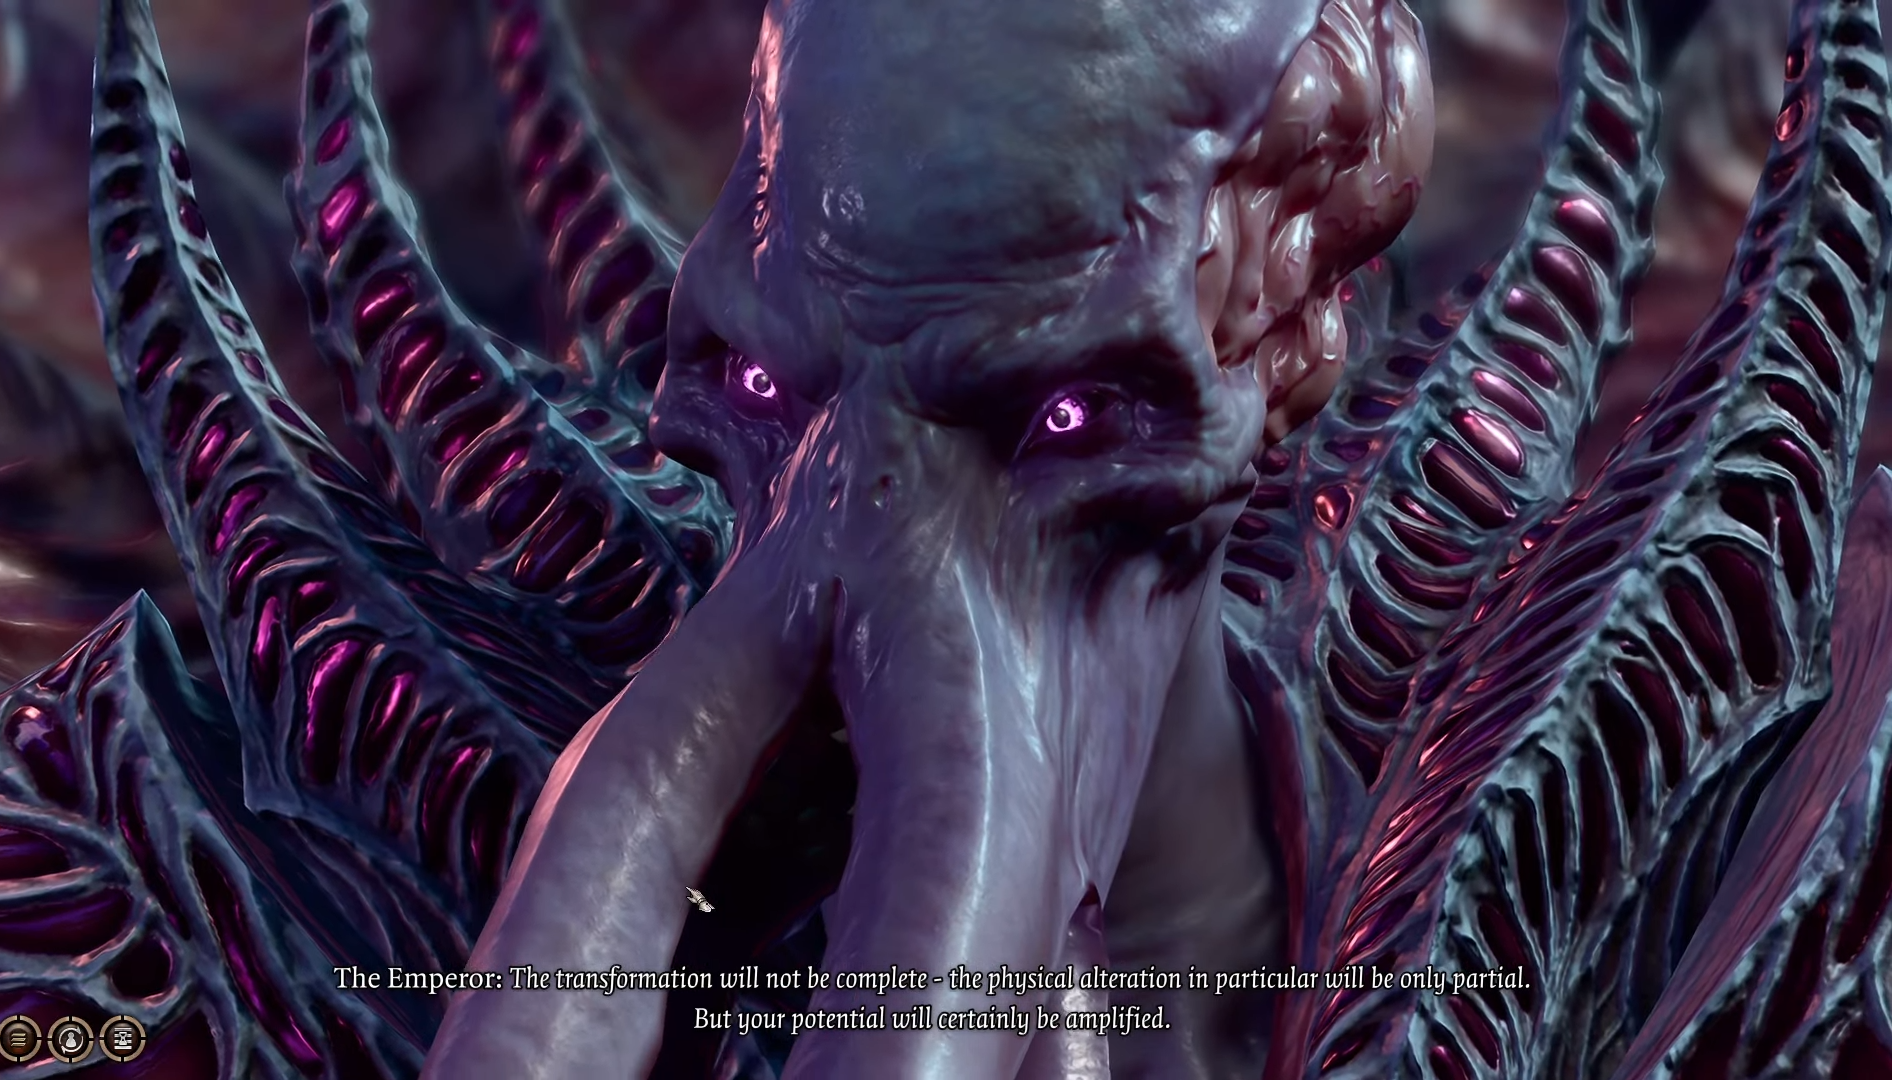 Image of the Mind Flayer known as the Emperor, posing the main character with a life-altering deal.